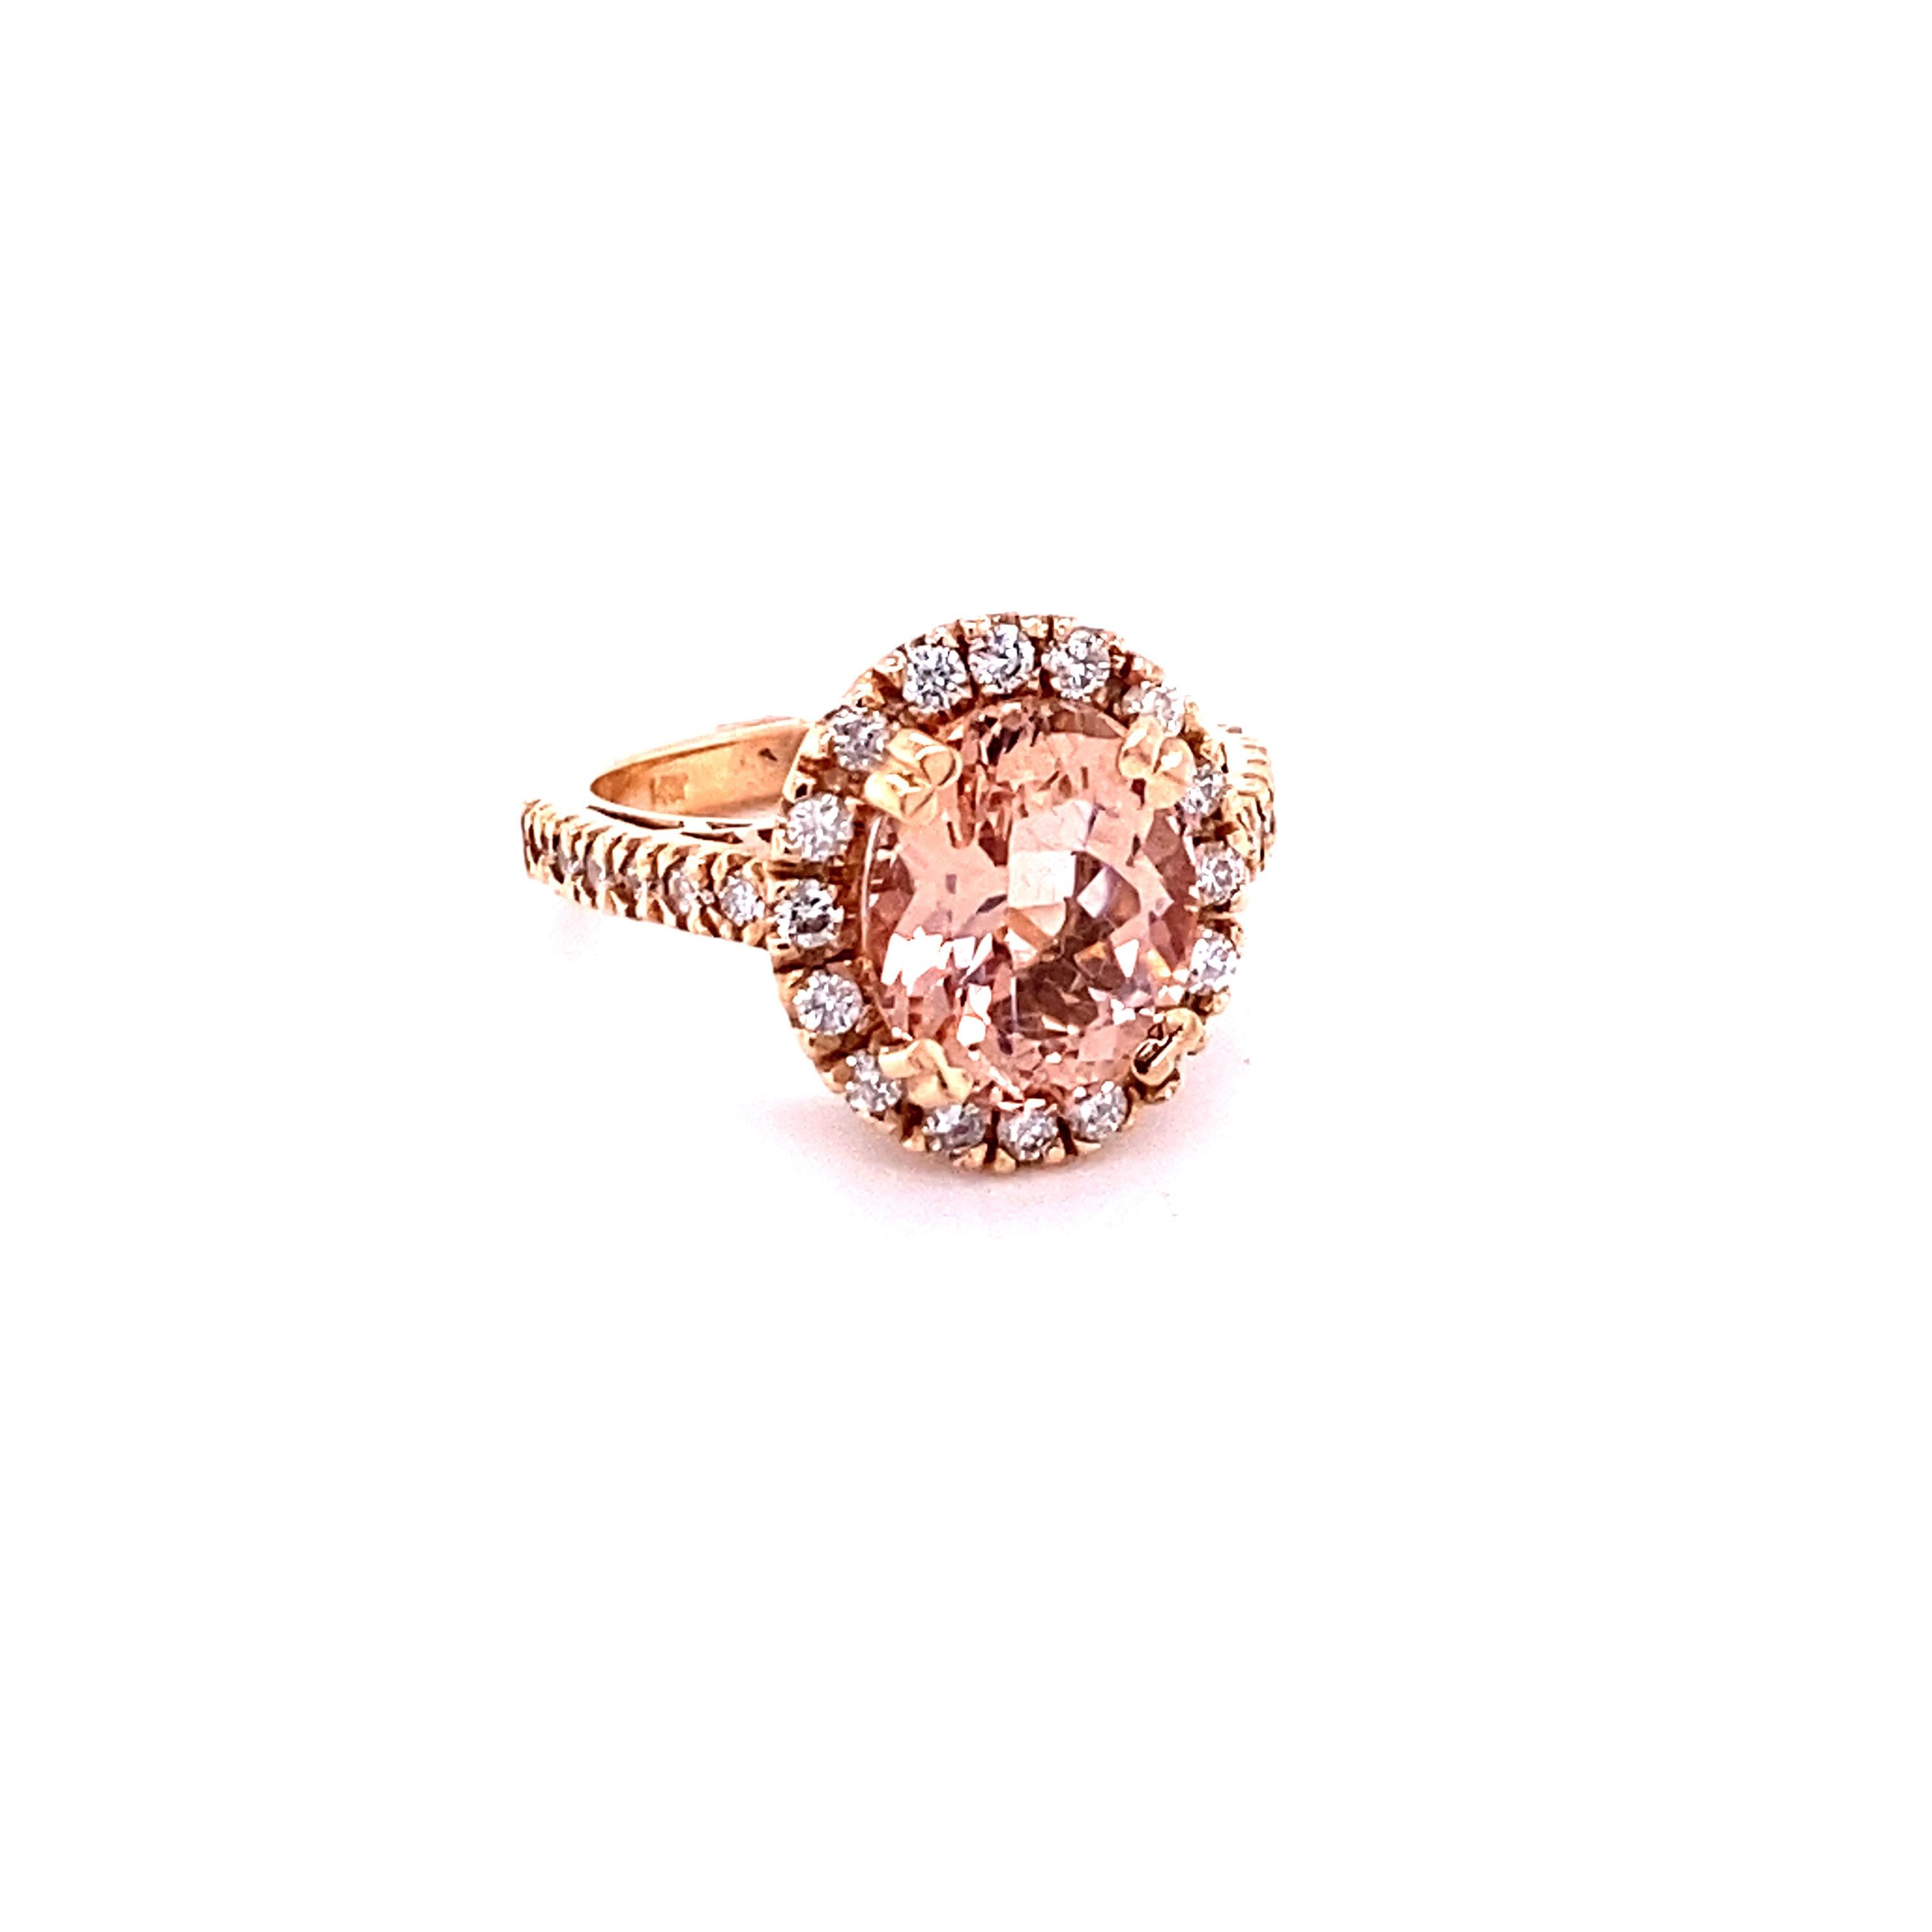 This Morganite ring has a beautiful 3.84 Carat Oval Cut Morganite and is surrounded by a simple halo of  28 Round Cut Diamonds that weigh 0.57 Carats.  The diamonds have a clarity and color of SI-F. The total carat weight of the ring is 4.41 Carats.